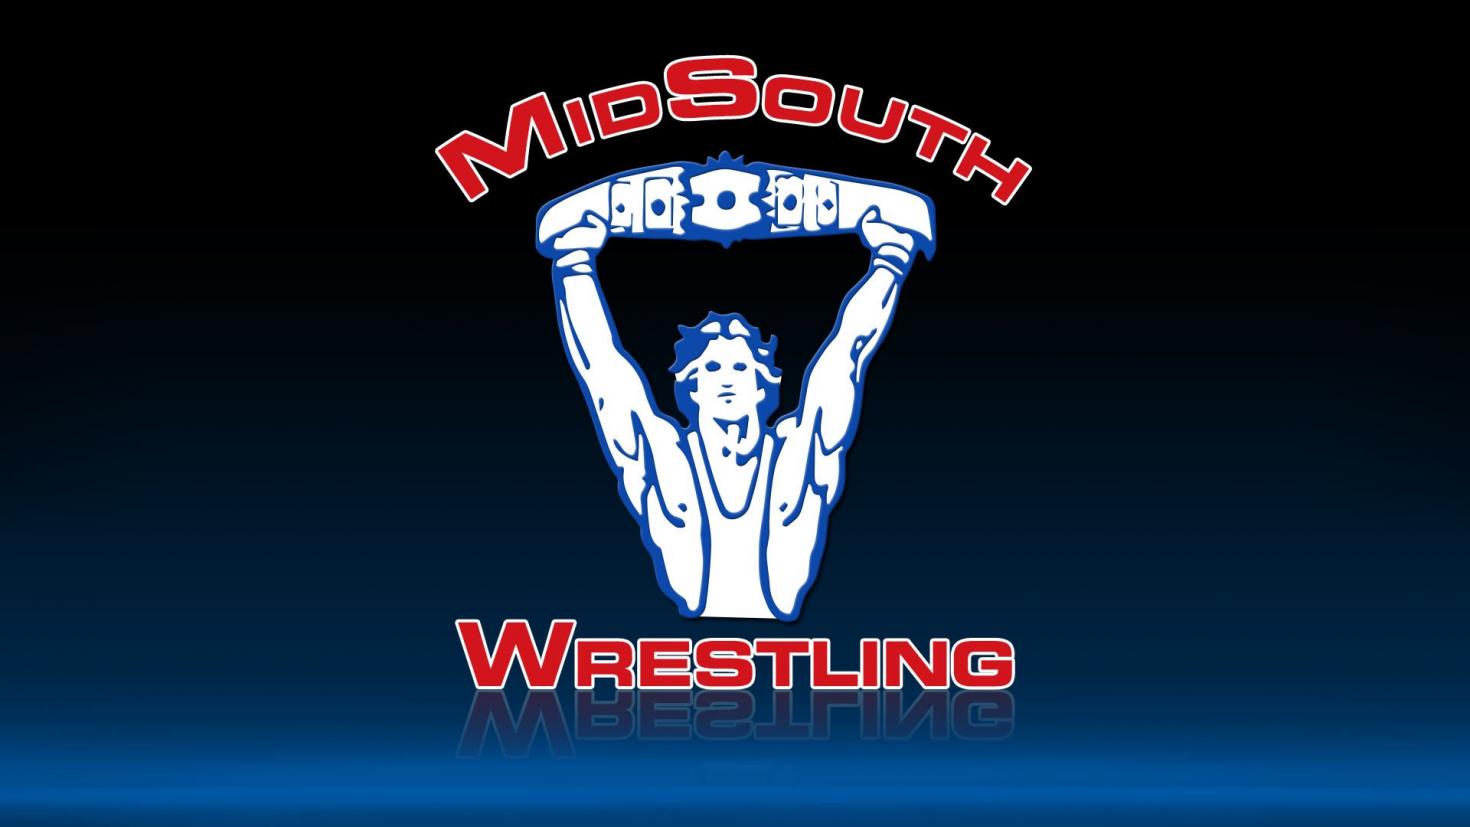 MID-SOUTH WRESTLING